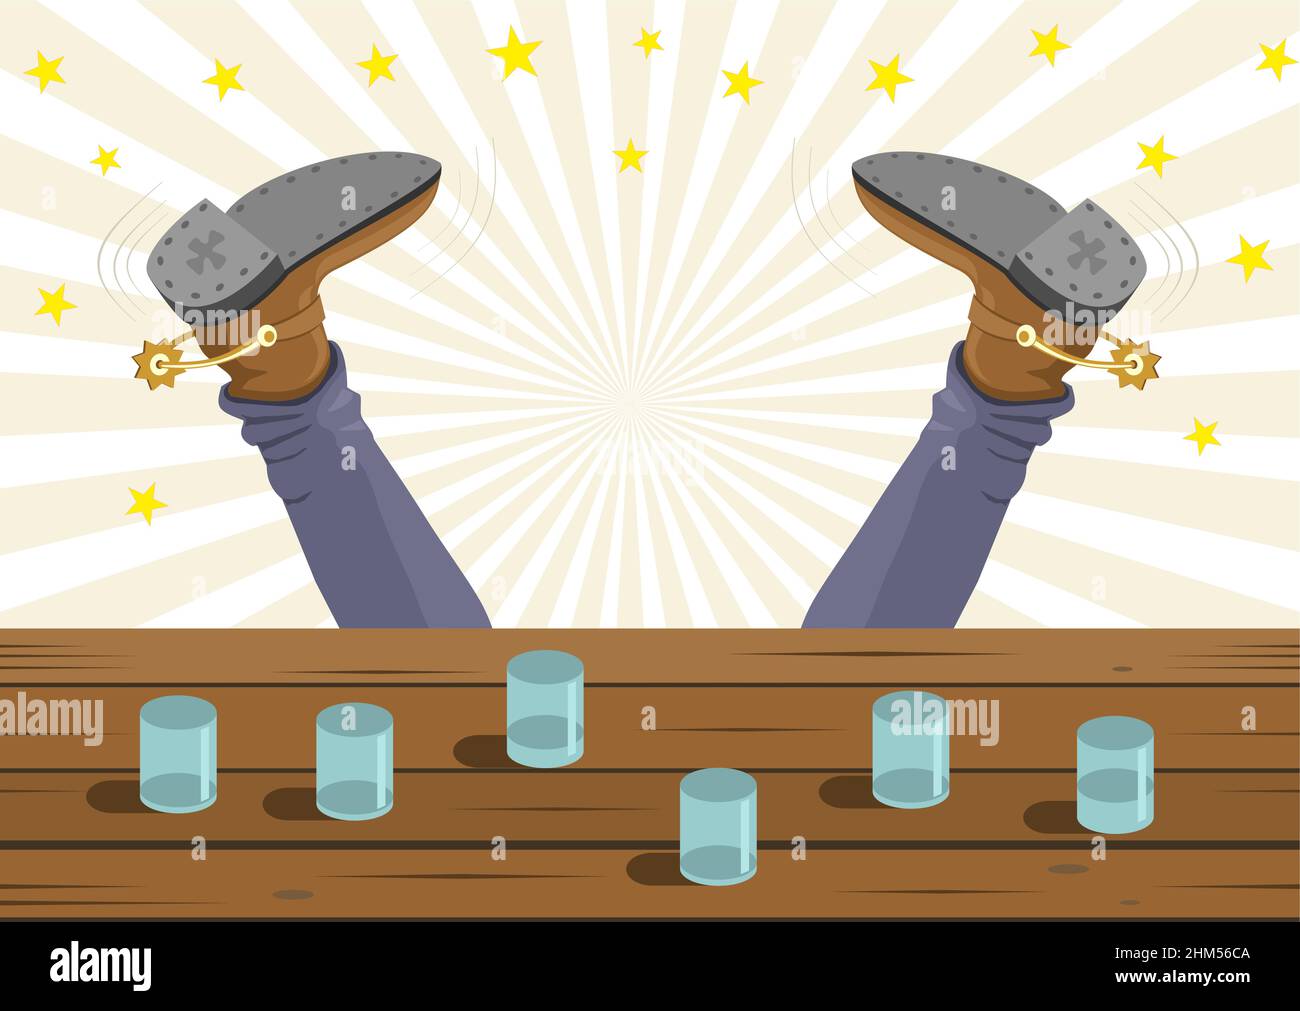 Drunk cowboy fell out of the bar. Vector cartoon background image Stock Vector